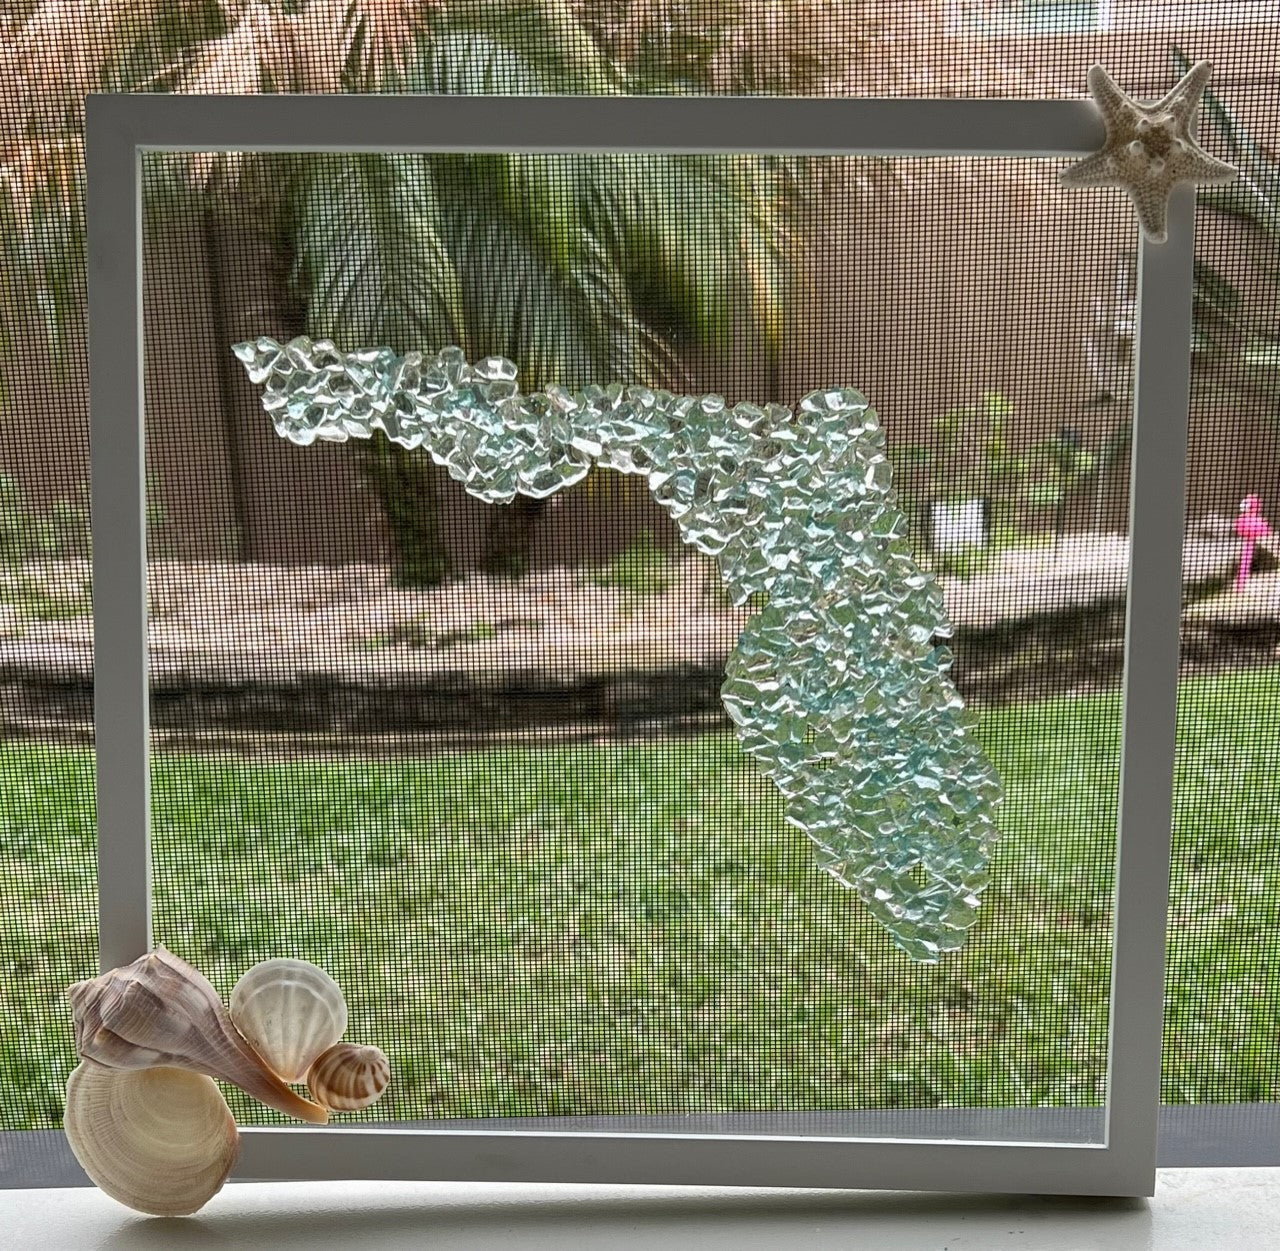 State of Florida on Glass